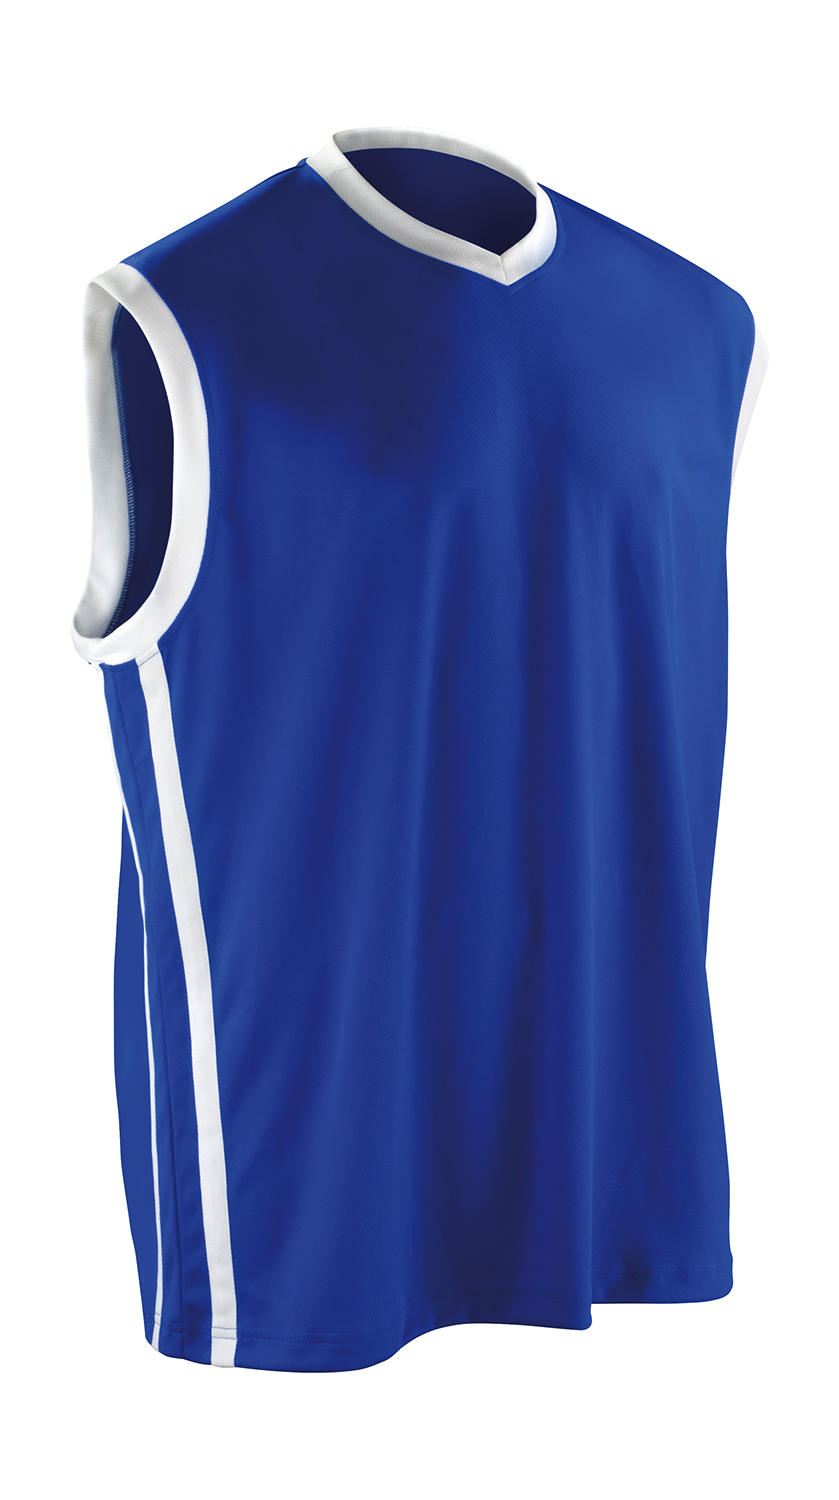  Mens Quick Dry Basketball Top in Farbe Royal/White